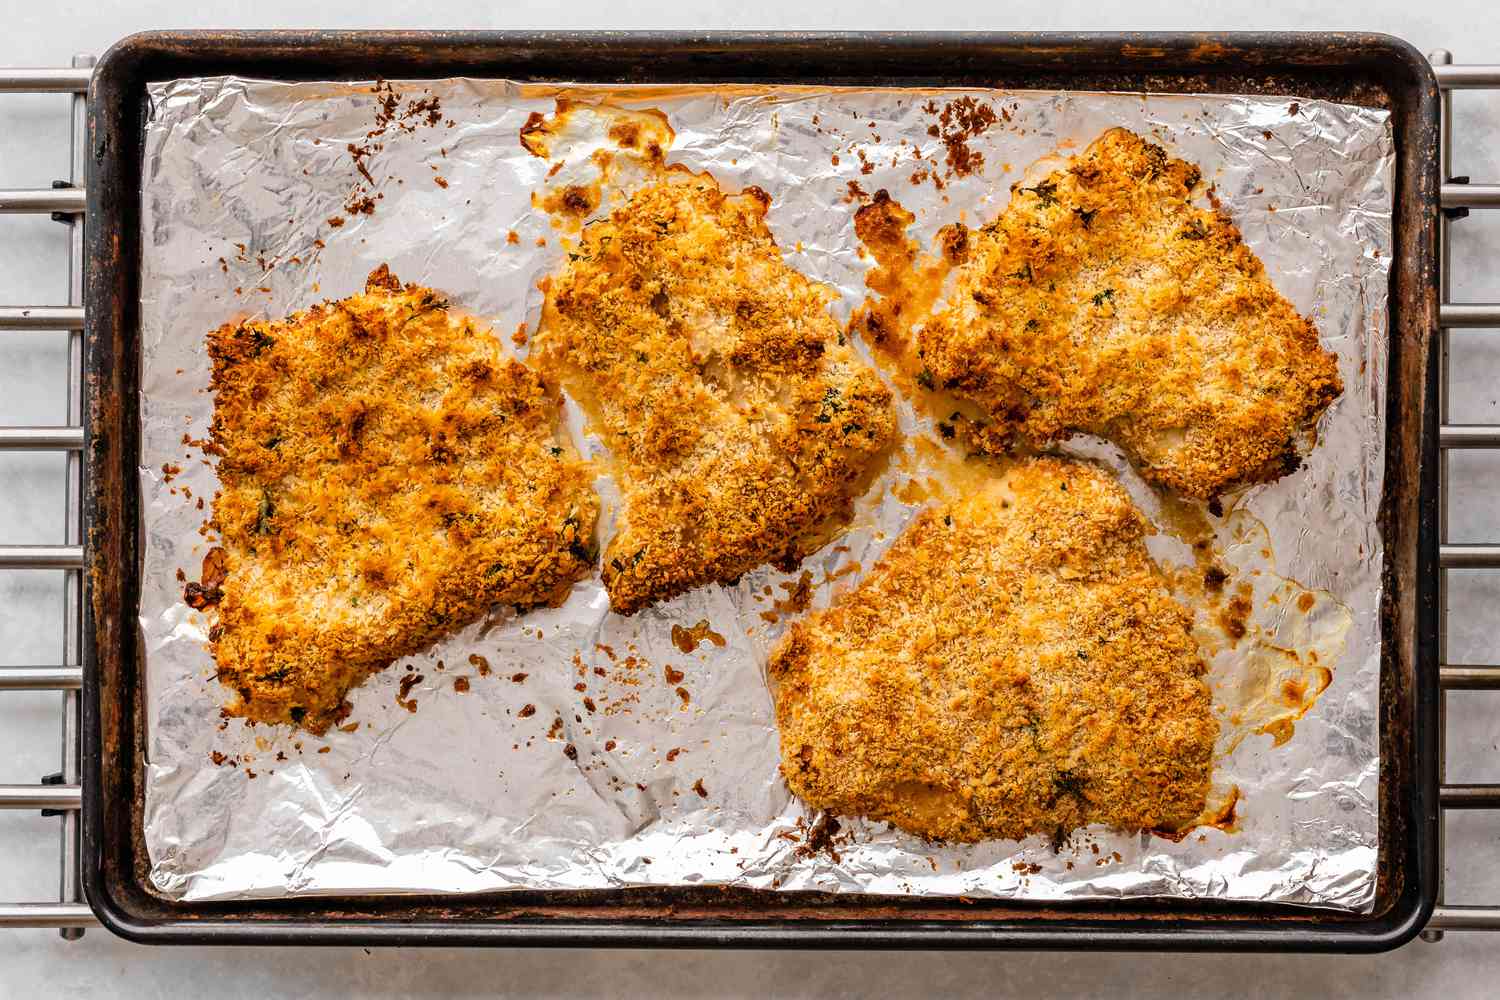 Panko-crusted oven-fried haddock fillets on a rimmed baking sheet lined with foil